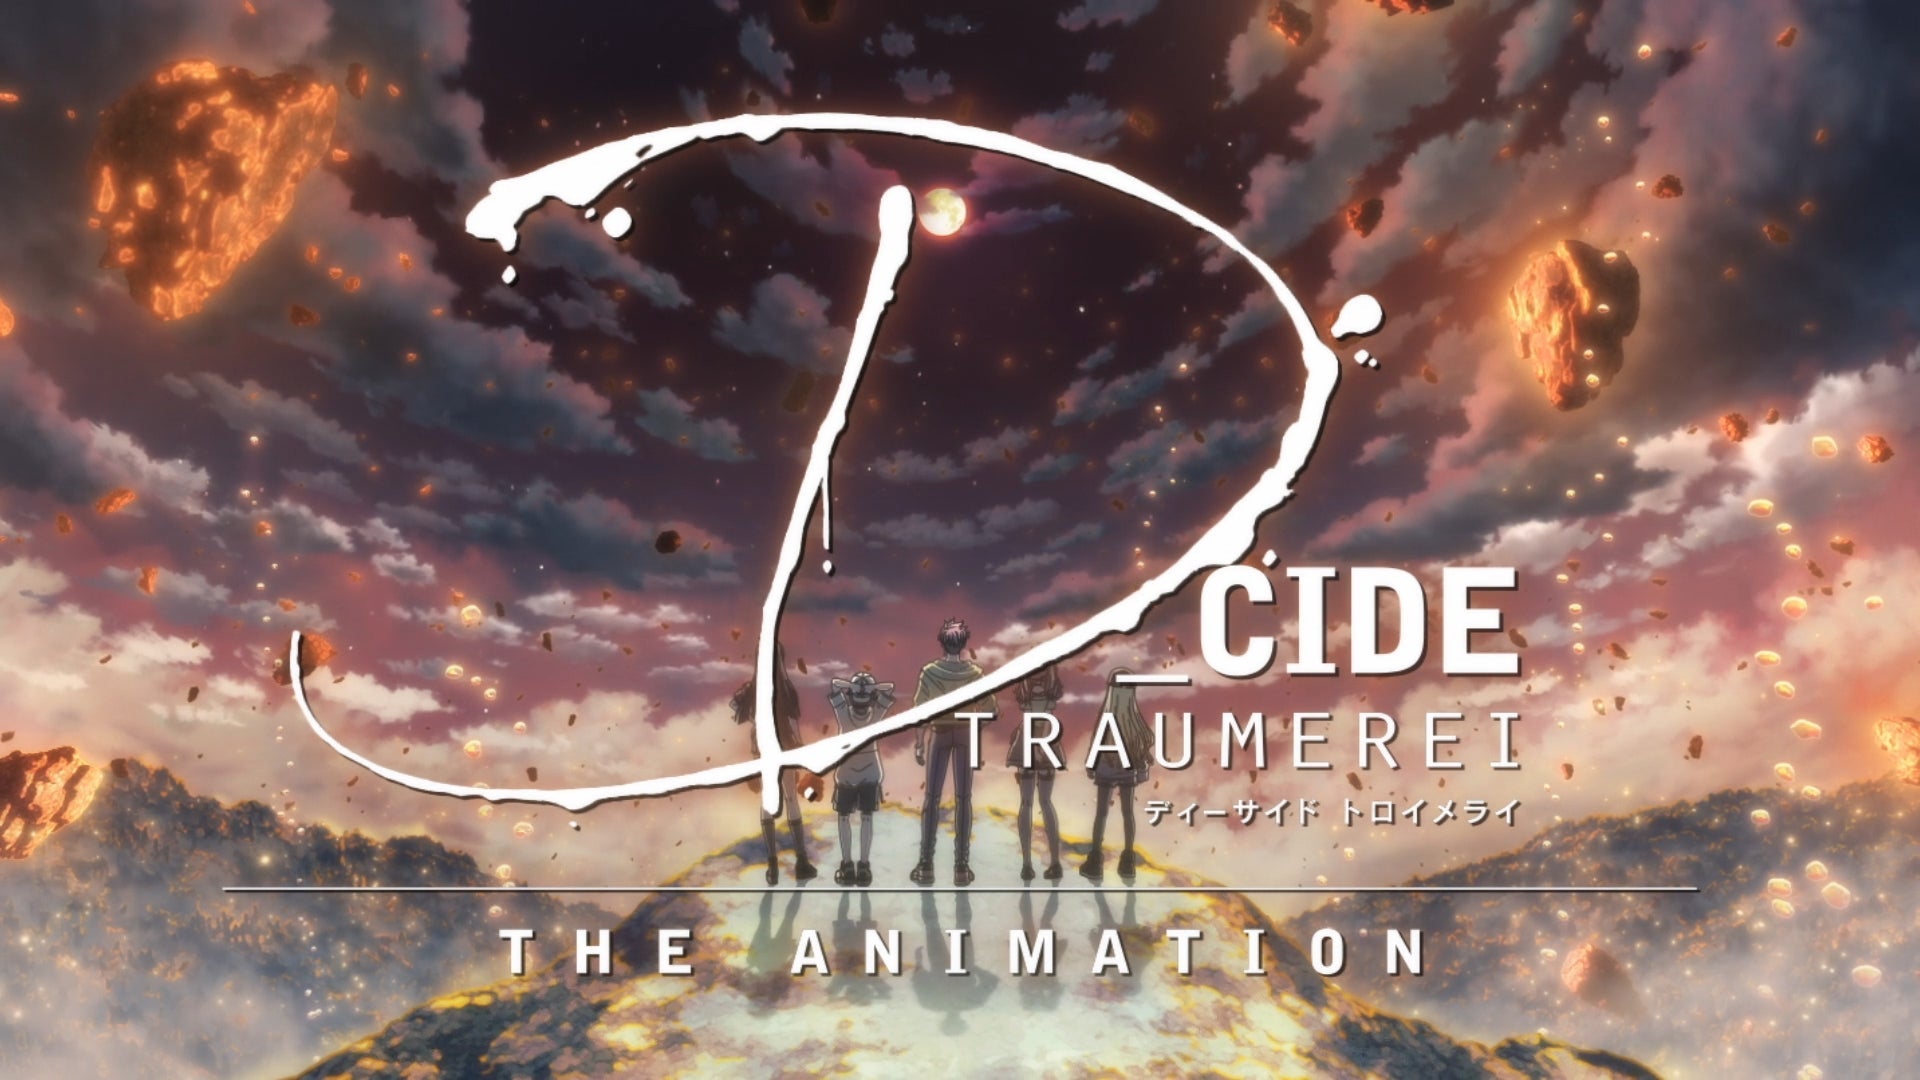 D_Cide Traumerei: A Thrilling Anime Adventure in a World of